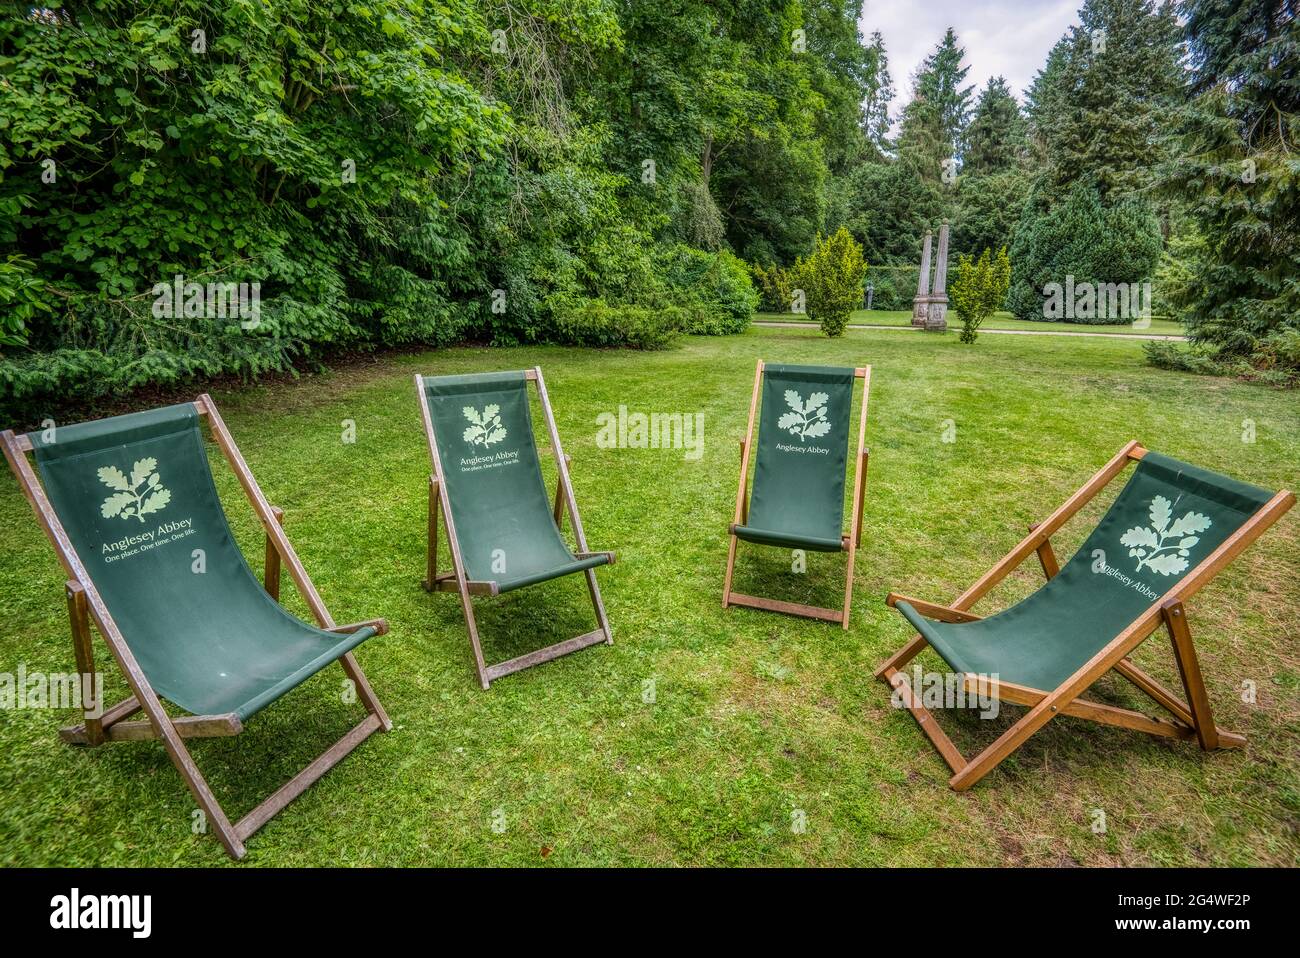 Take a load off. A semi-circie of deckchairs await visitors to Anglesey Abbey, a Jacobean-style country house at Lode, near Camdridge, UK, Stock Photo